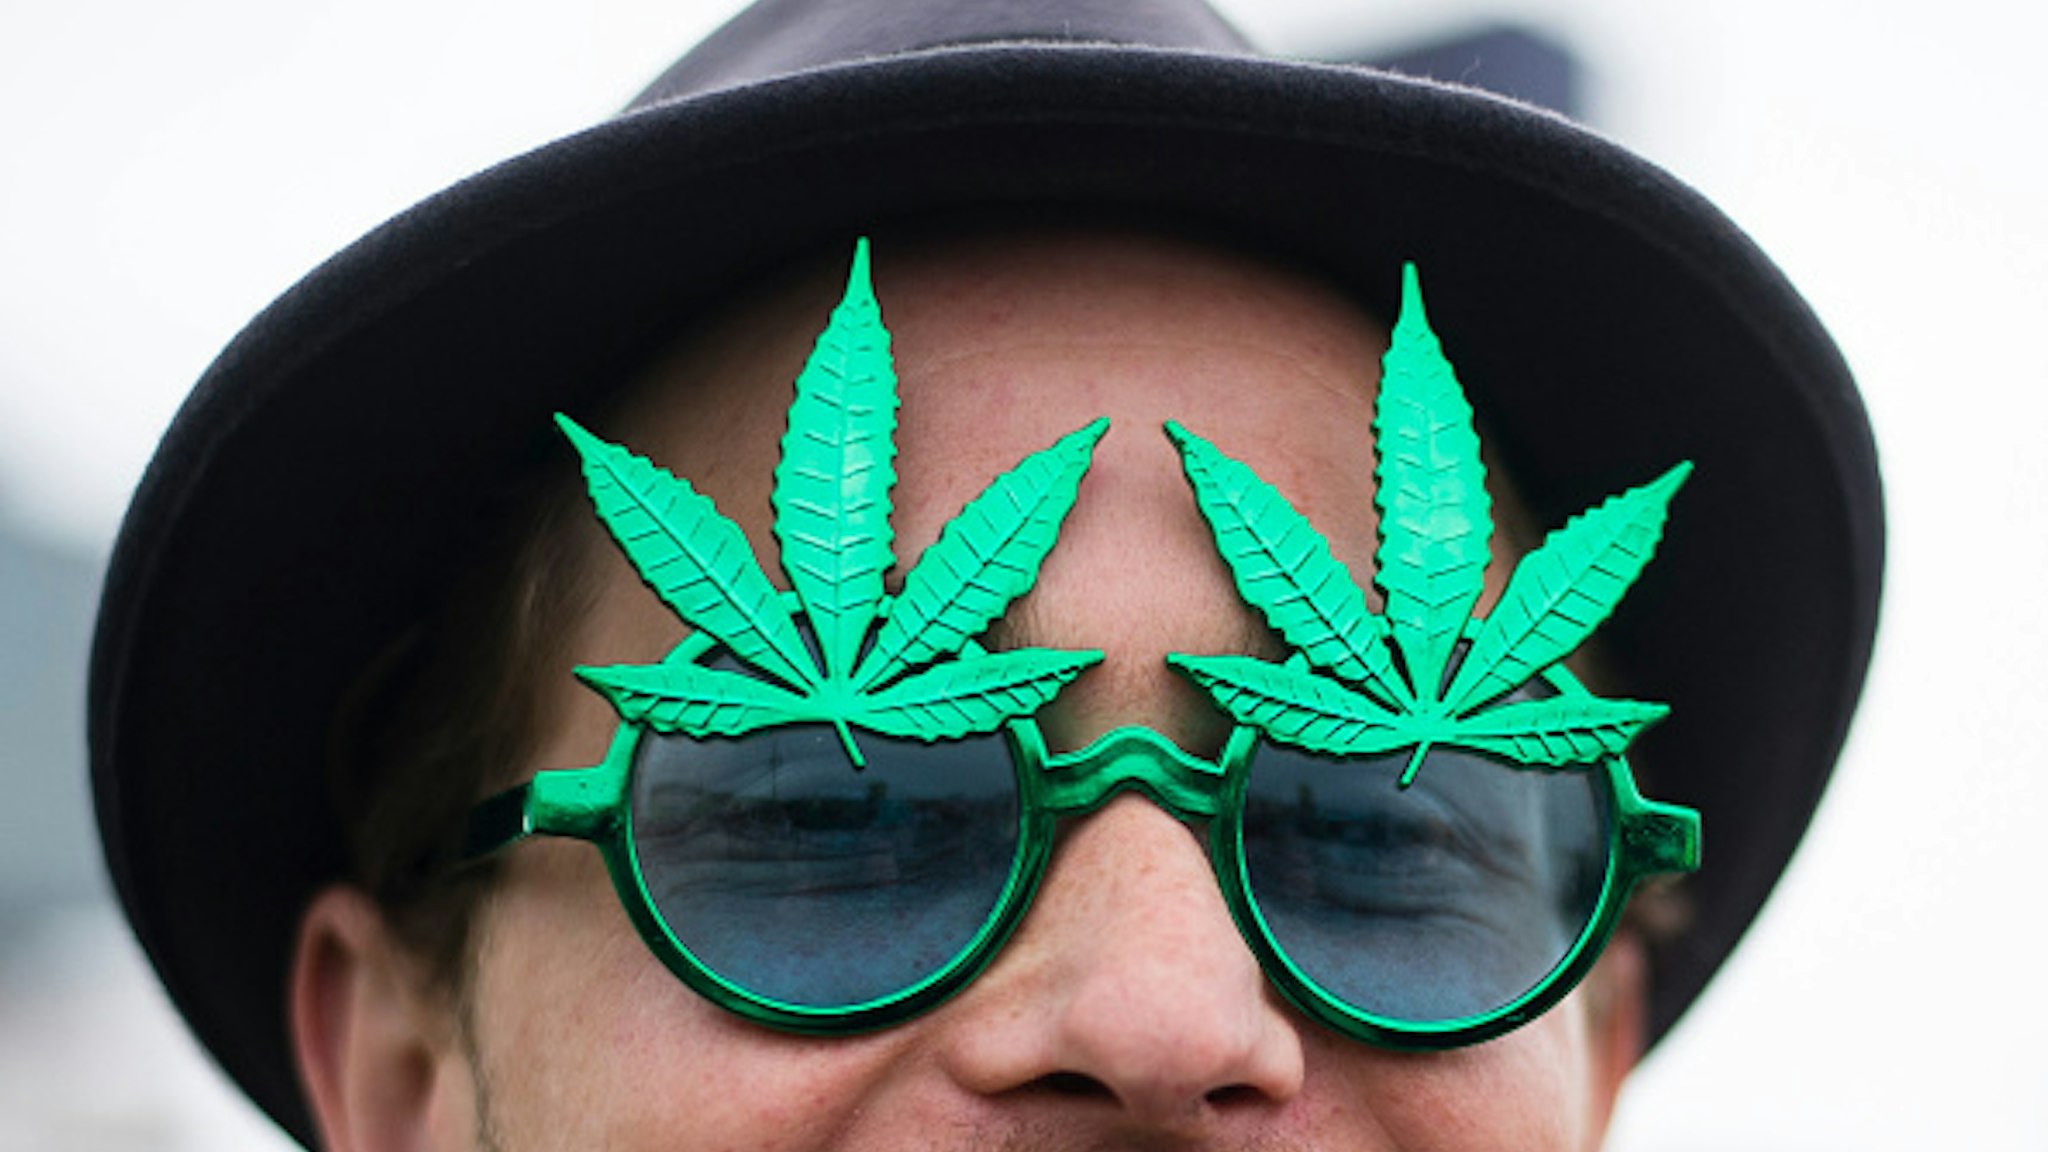 A demonstrator wears a pair of hemp glasses during a demonstration in favour of legalising cannabis in Berlin, Germany, 16 May 2015. The 'Global Marijuana March' is taking place with rallys worldwide. Photo: Gregor Fischer/dpa | usage worldwide